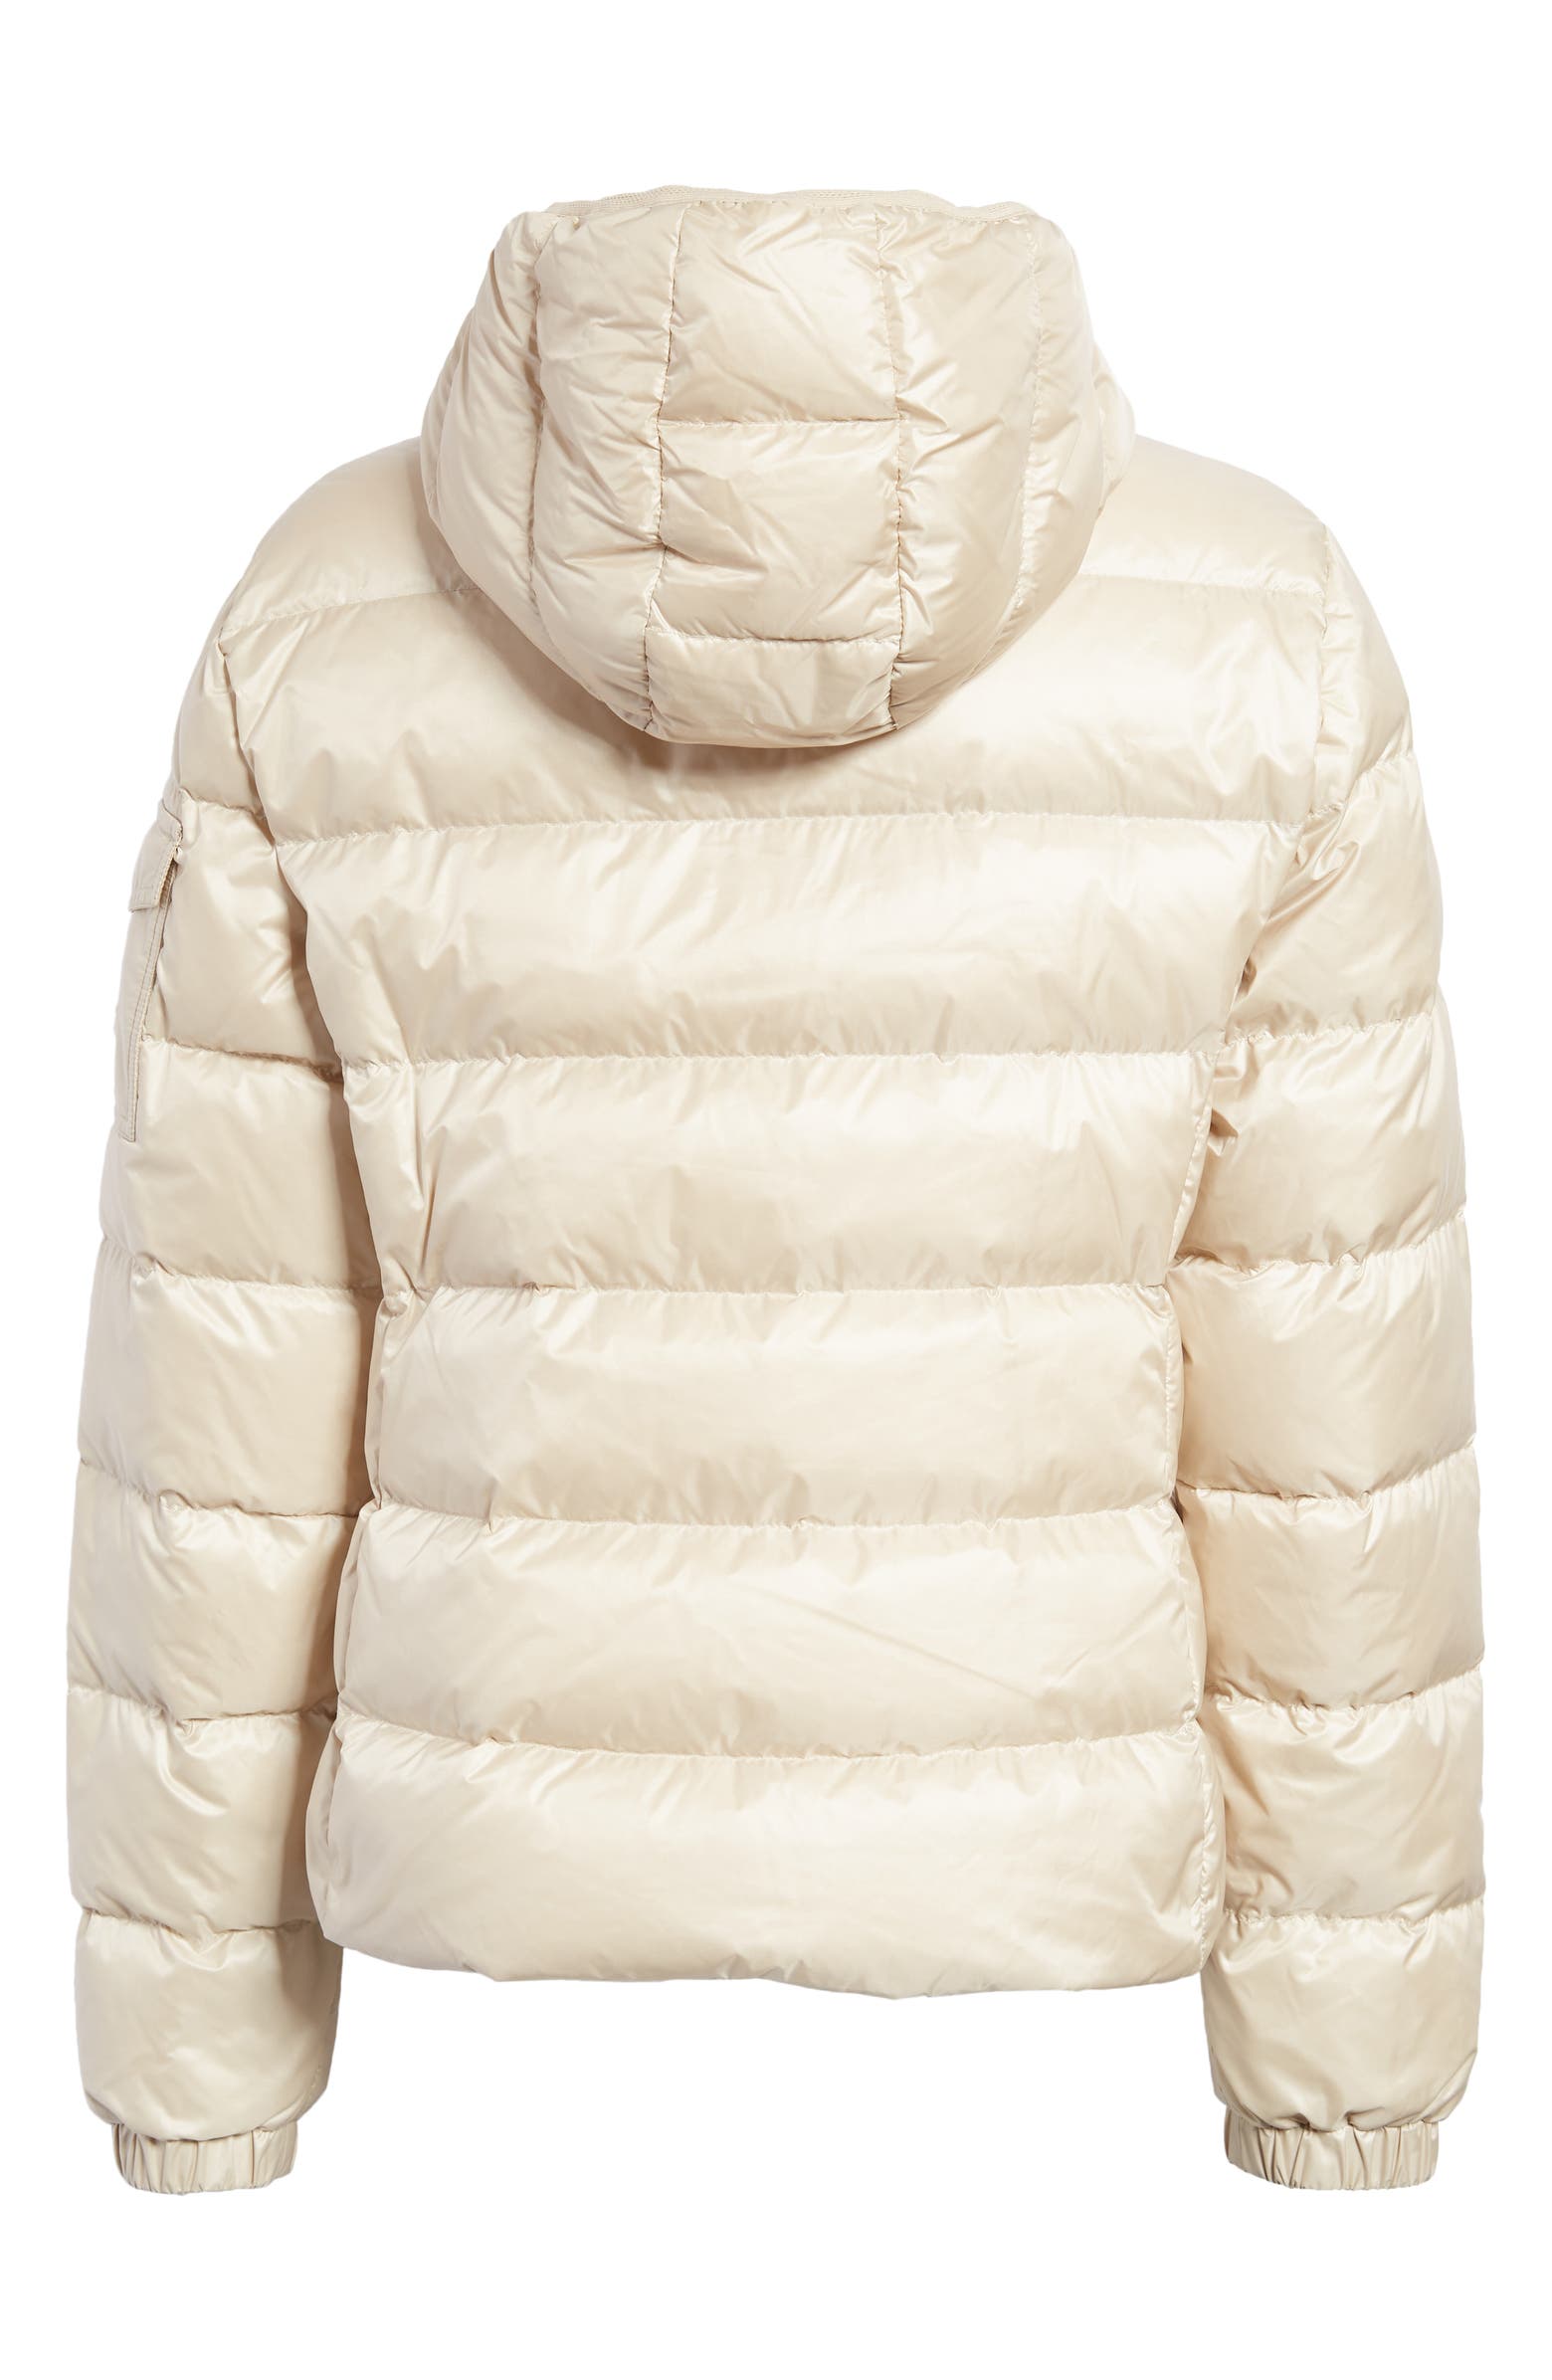 Moncler Gles Recycled Nylon Down Jacket | Nordstrom